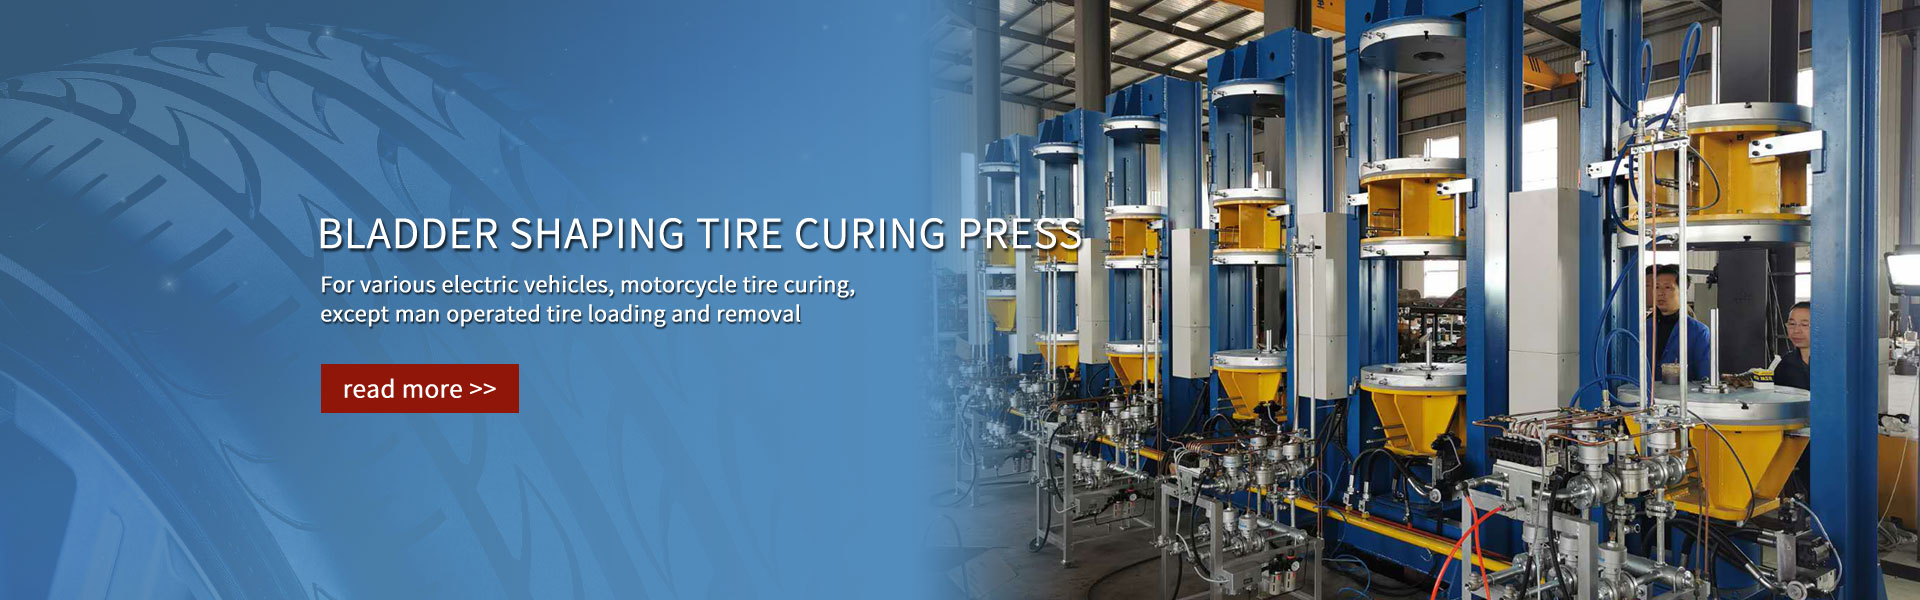 Bladder shaping tire curing press